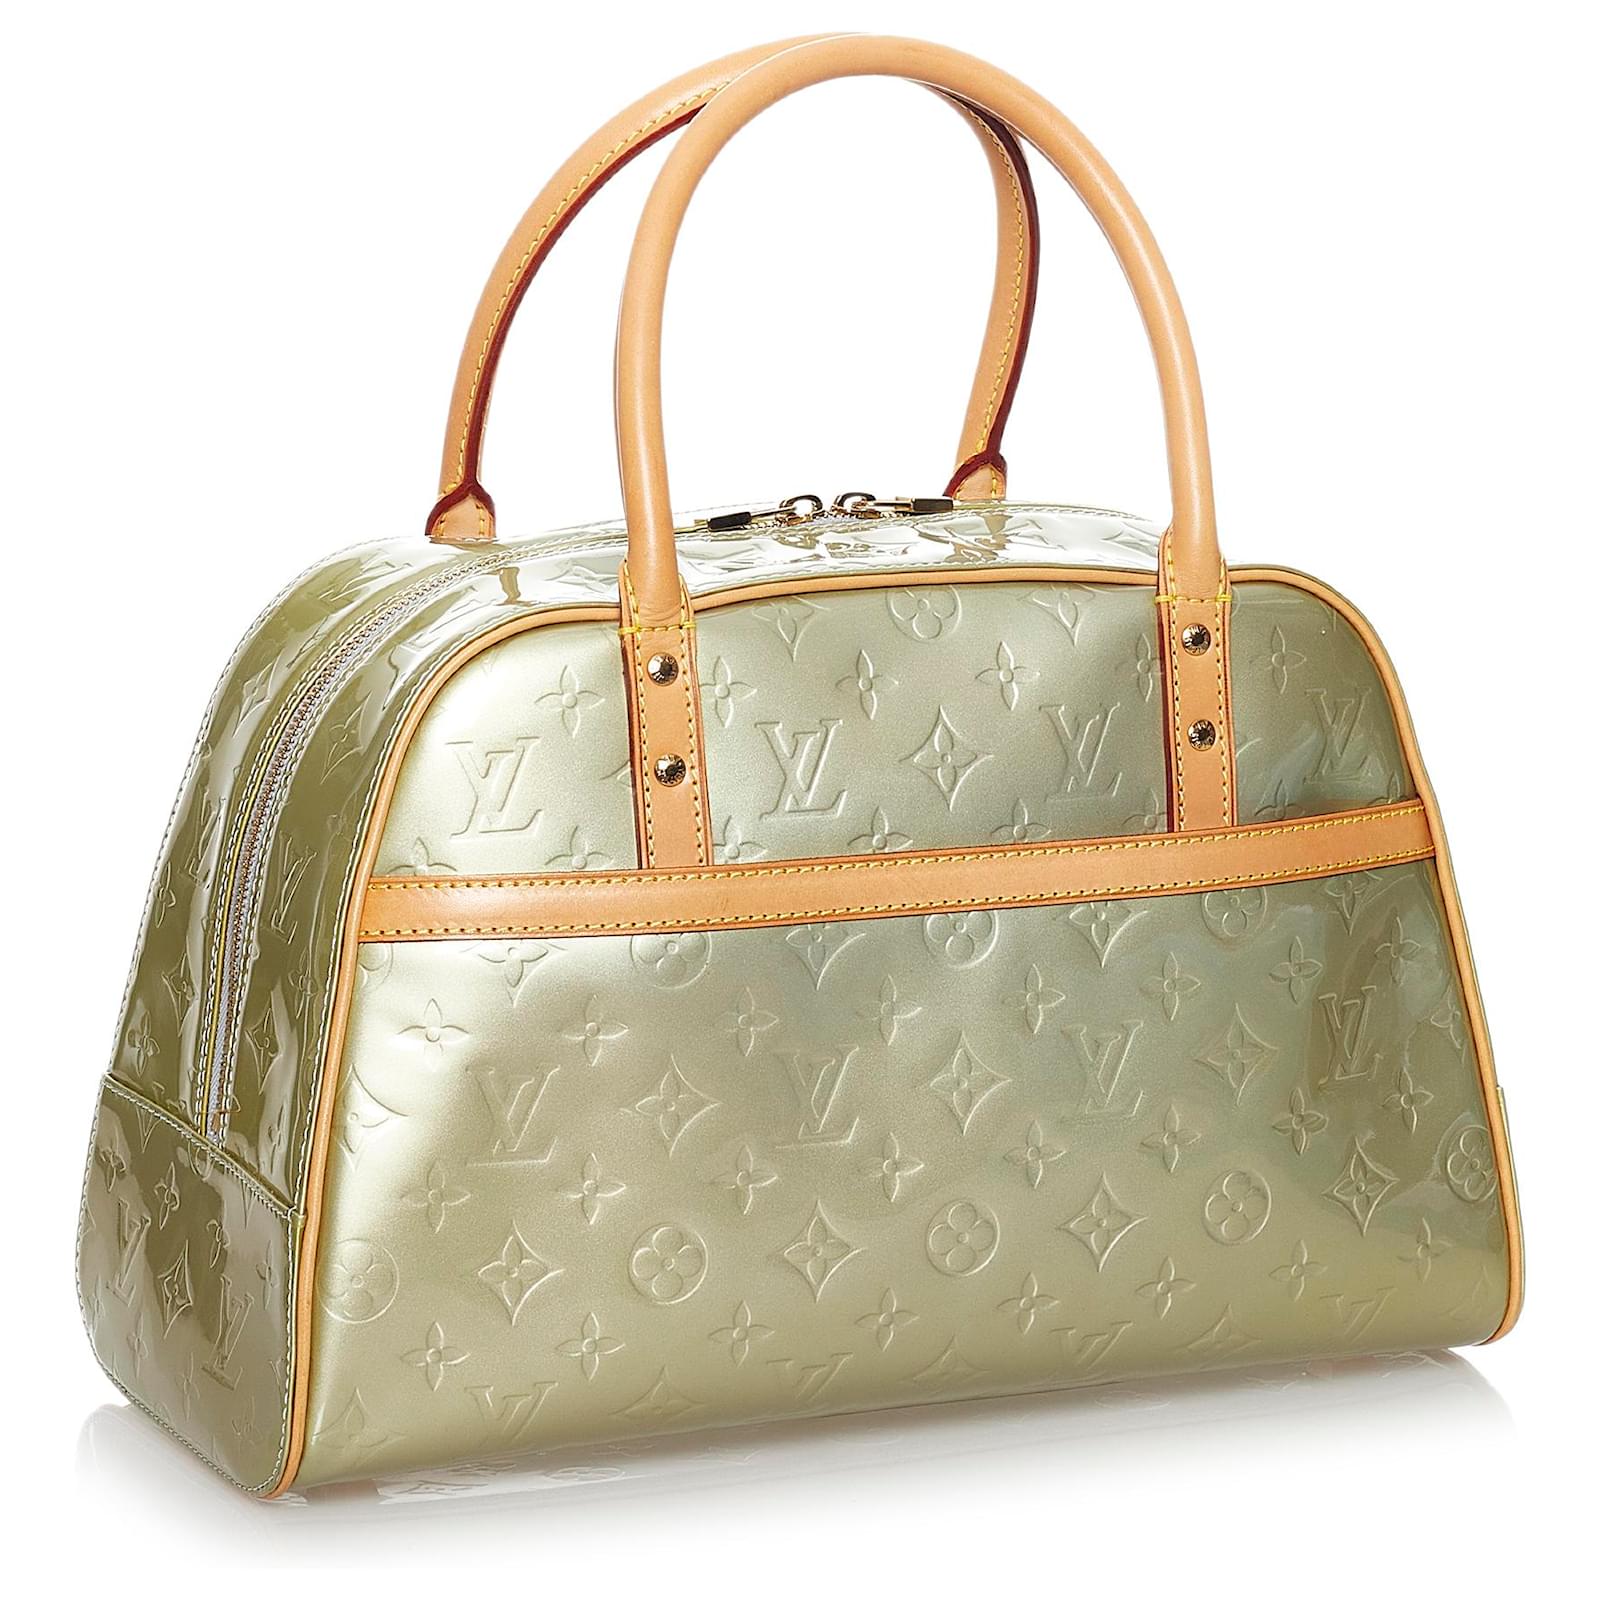 Louis Vuitton Green Vernis Tompkins Square Leather Patent leather